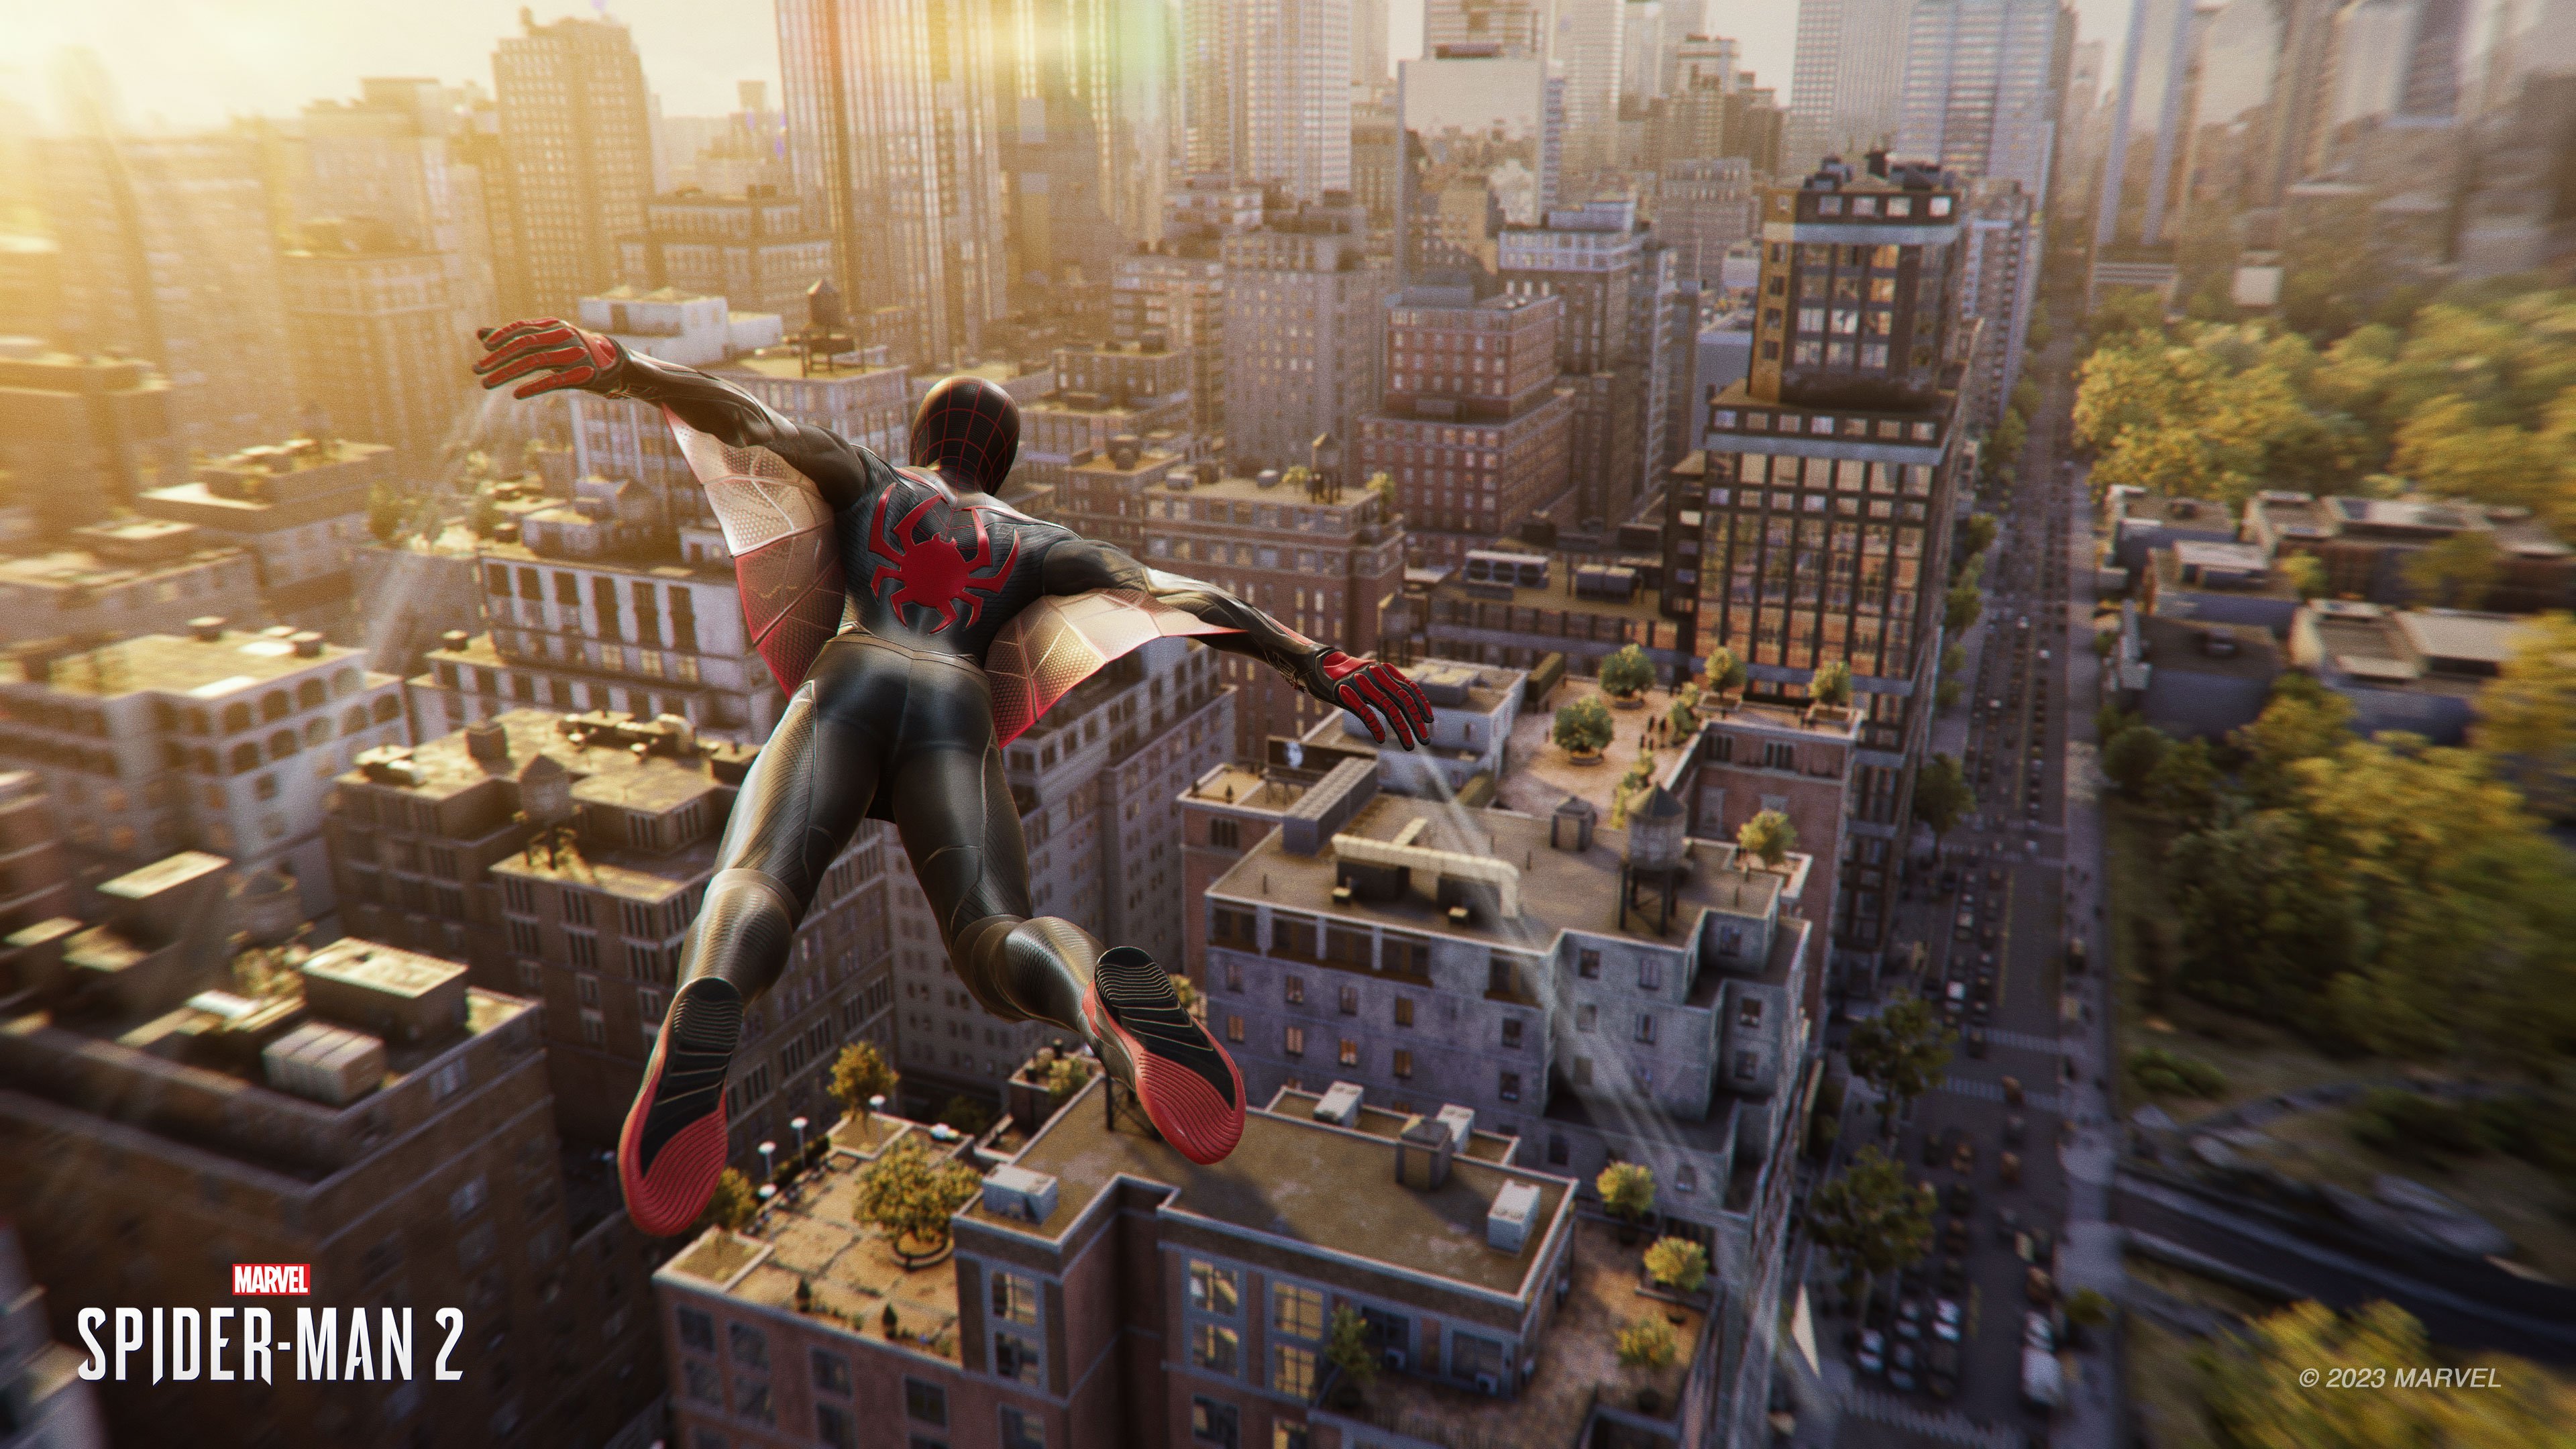 Marvel's Spider-Man roughly twice the size previous games, character switching - Gematsu